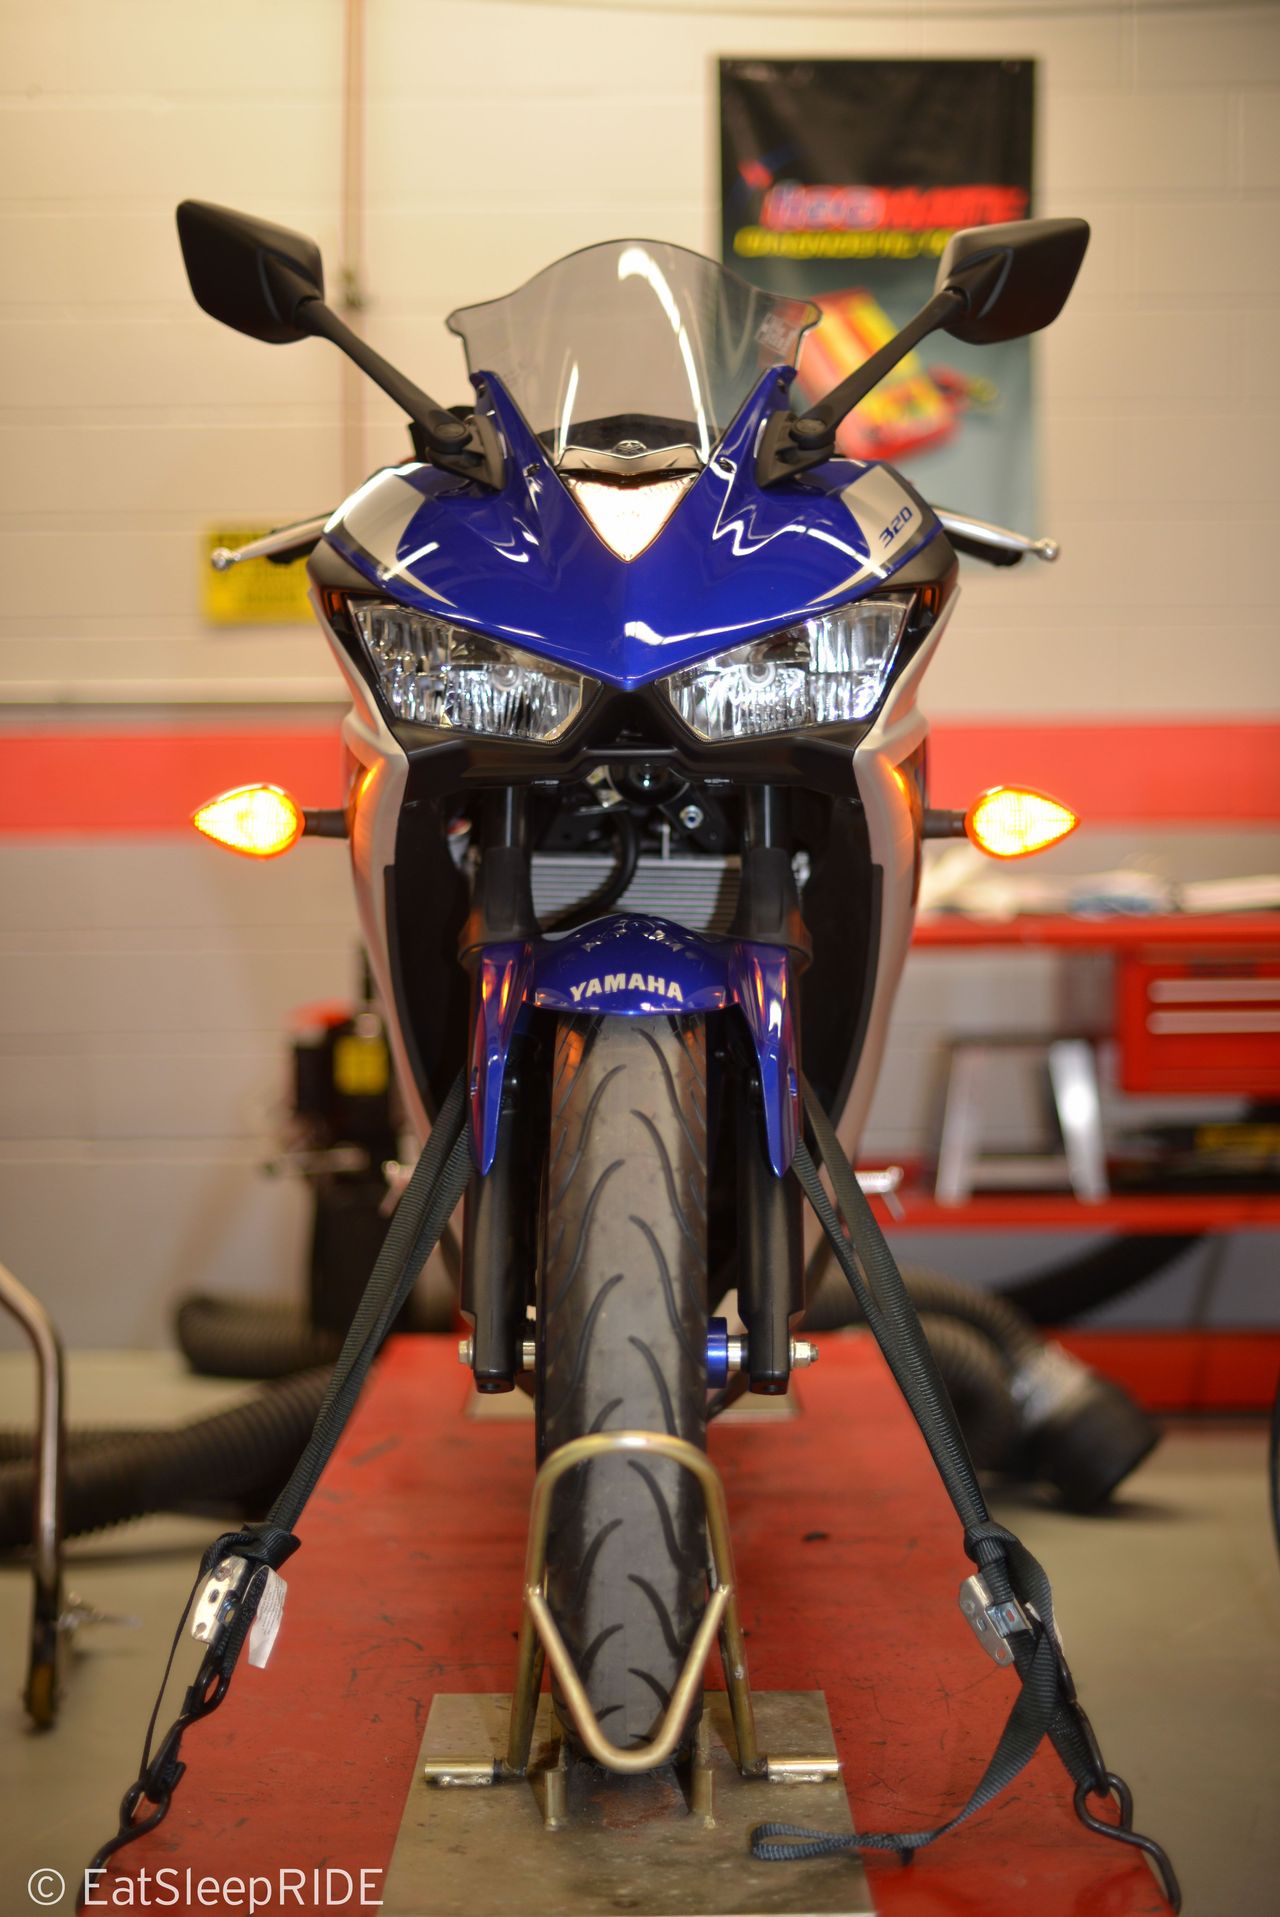 The Yamaha R3 - take your pick of Blue, Red or Black